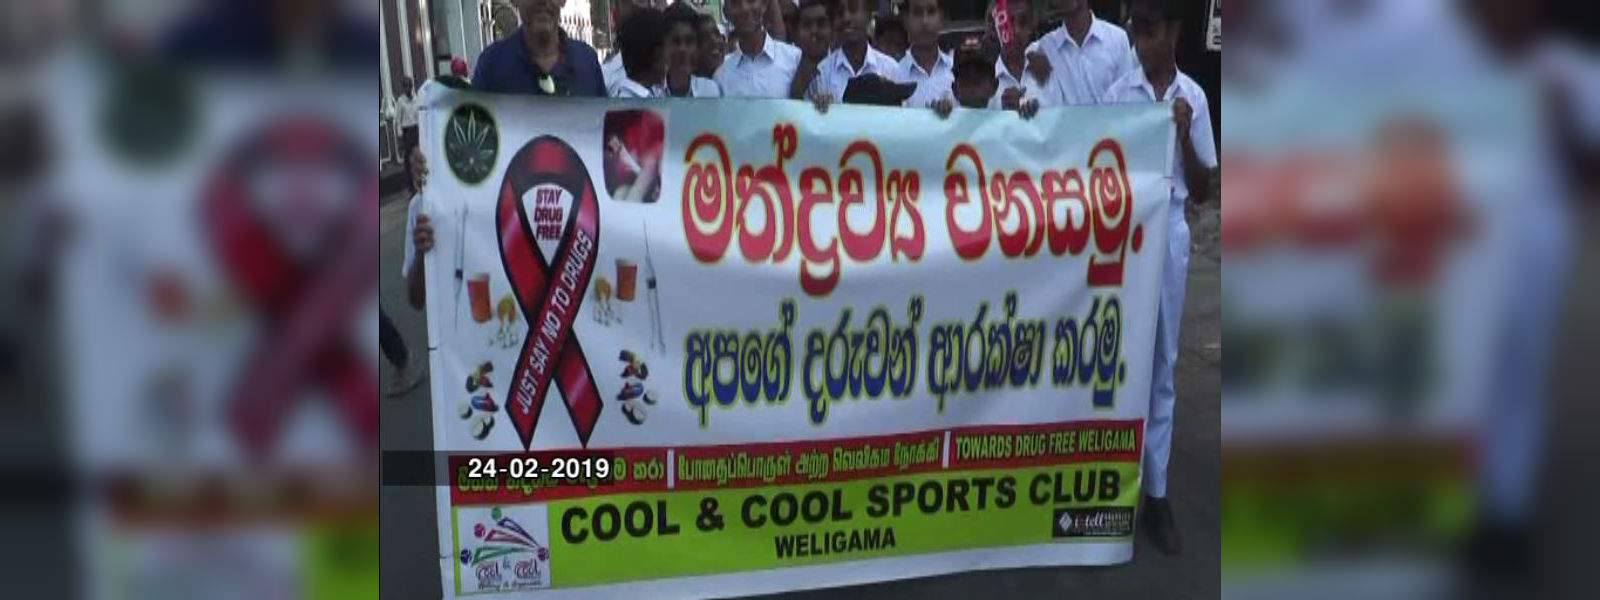 A police march against drugs